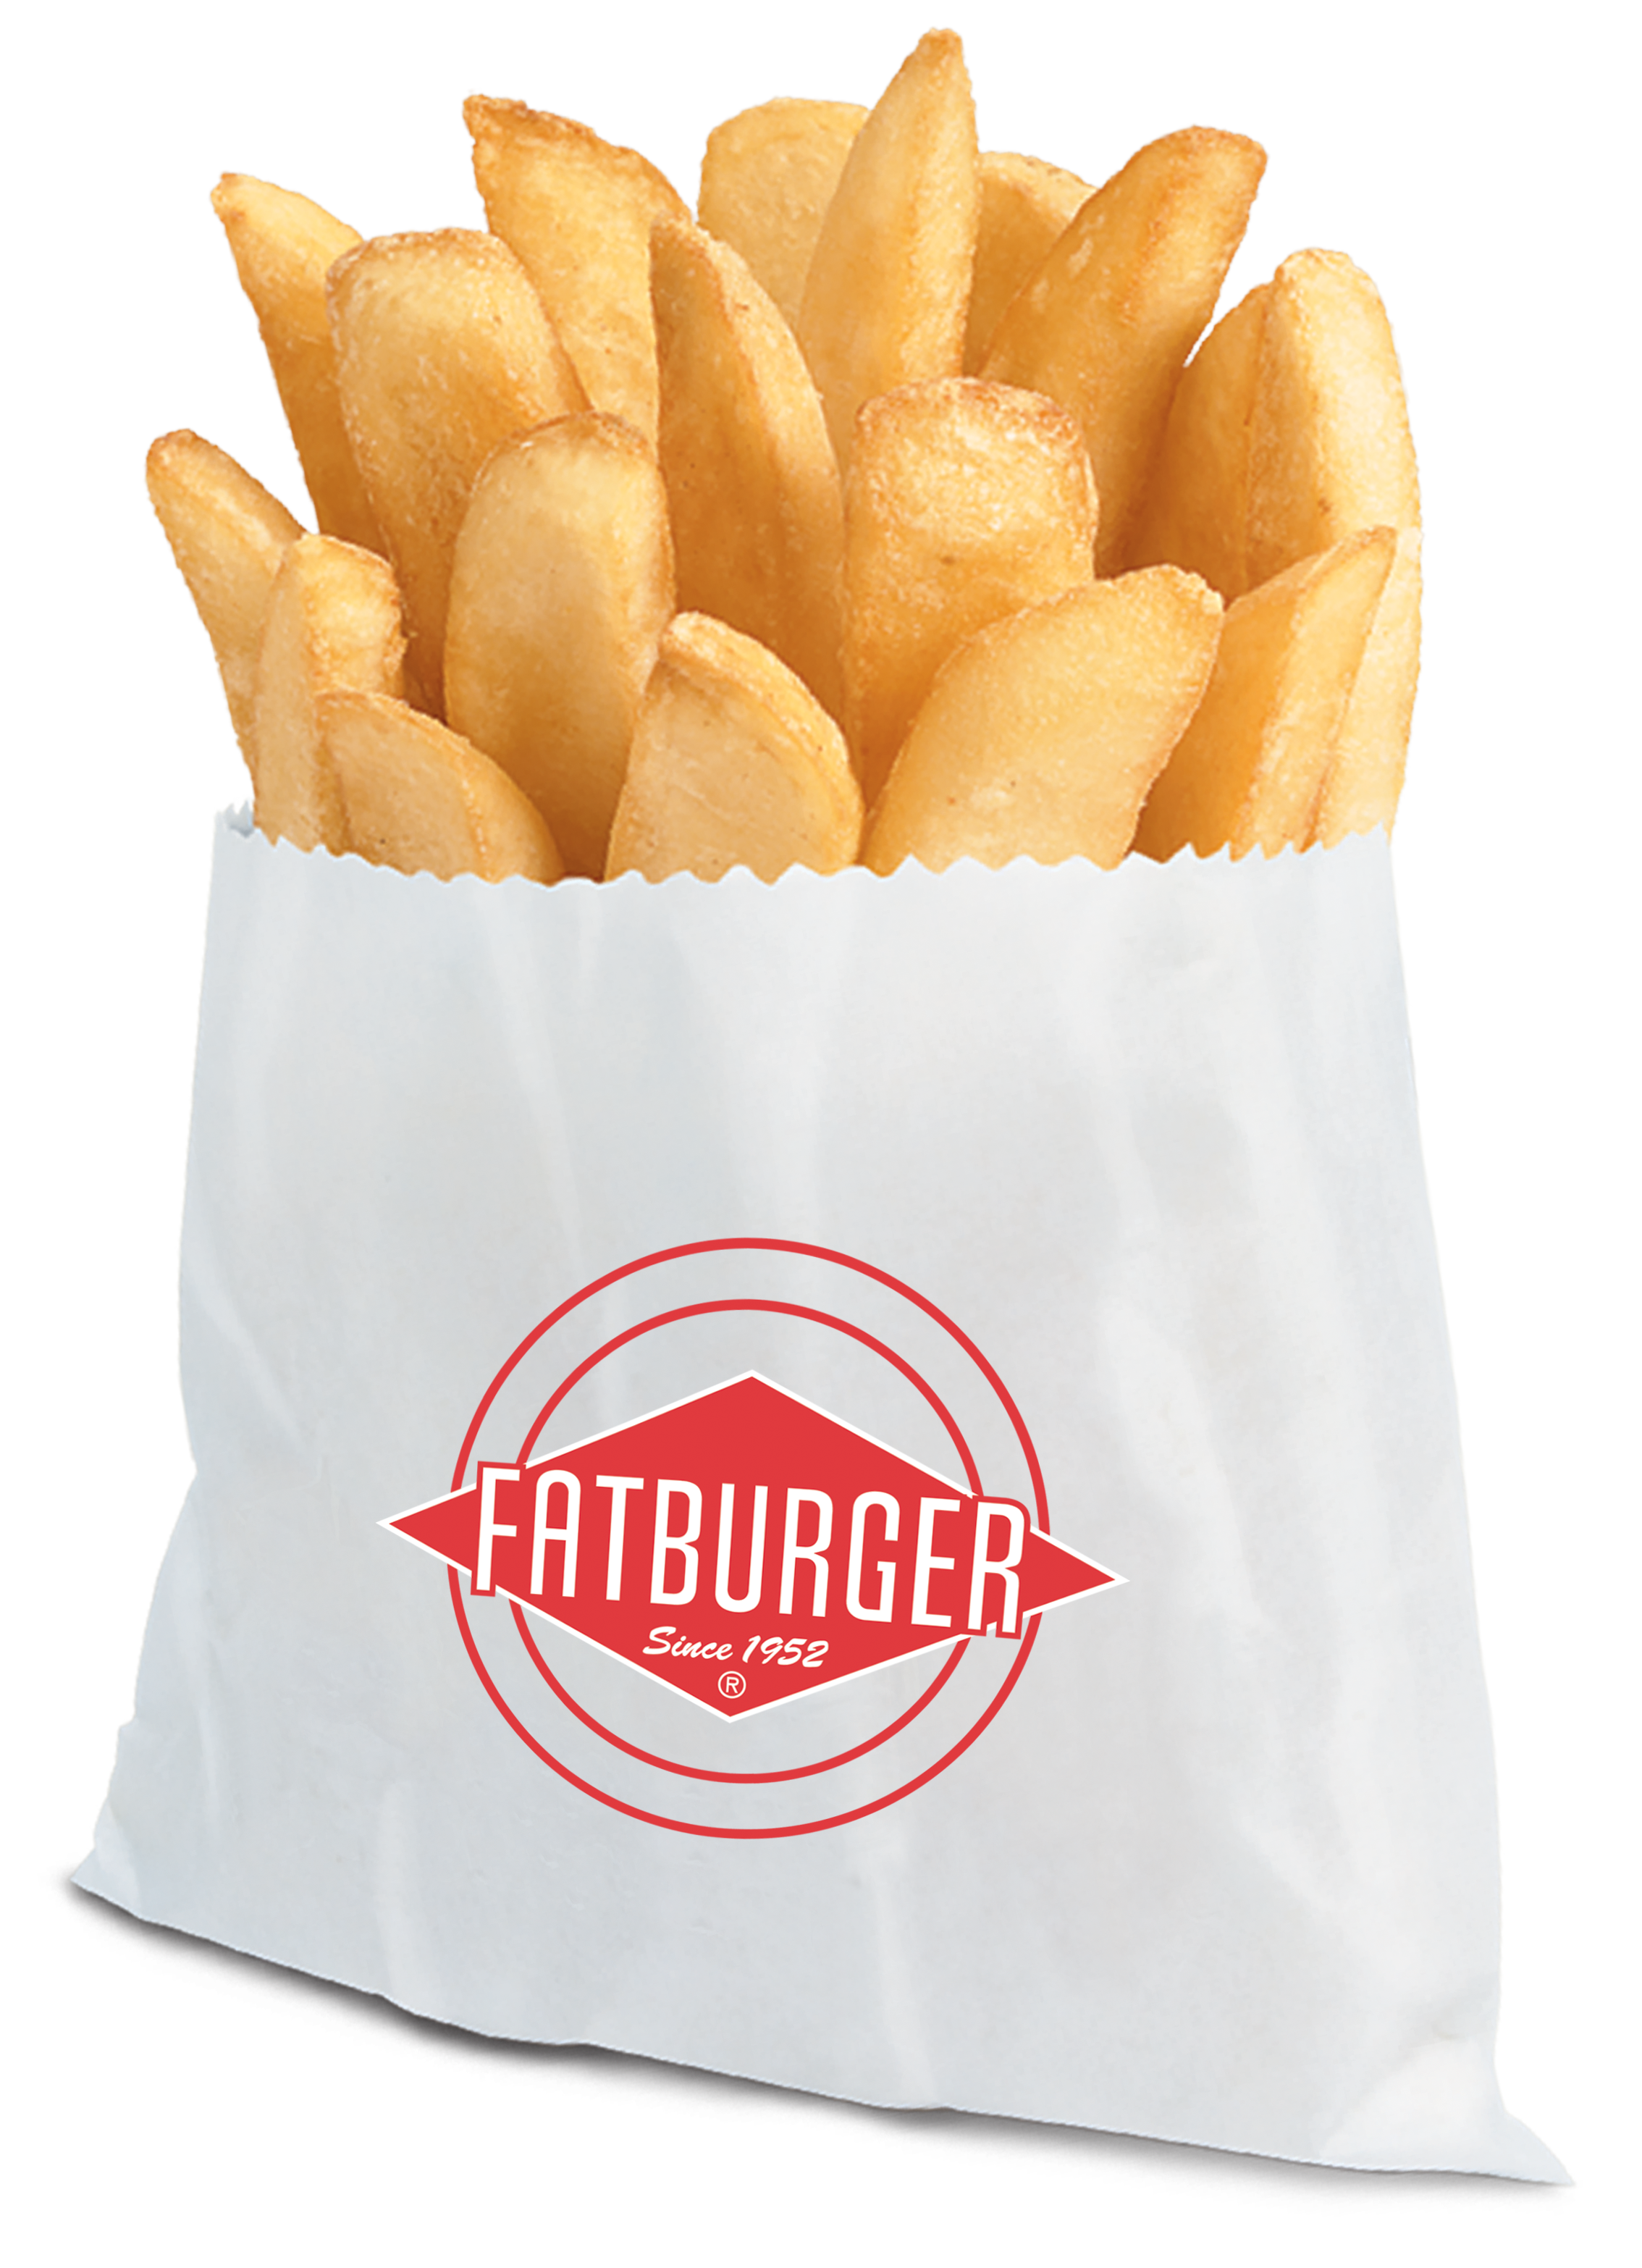 Free Fries at Fatburger Grand Re-Opening!